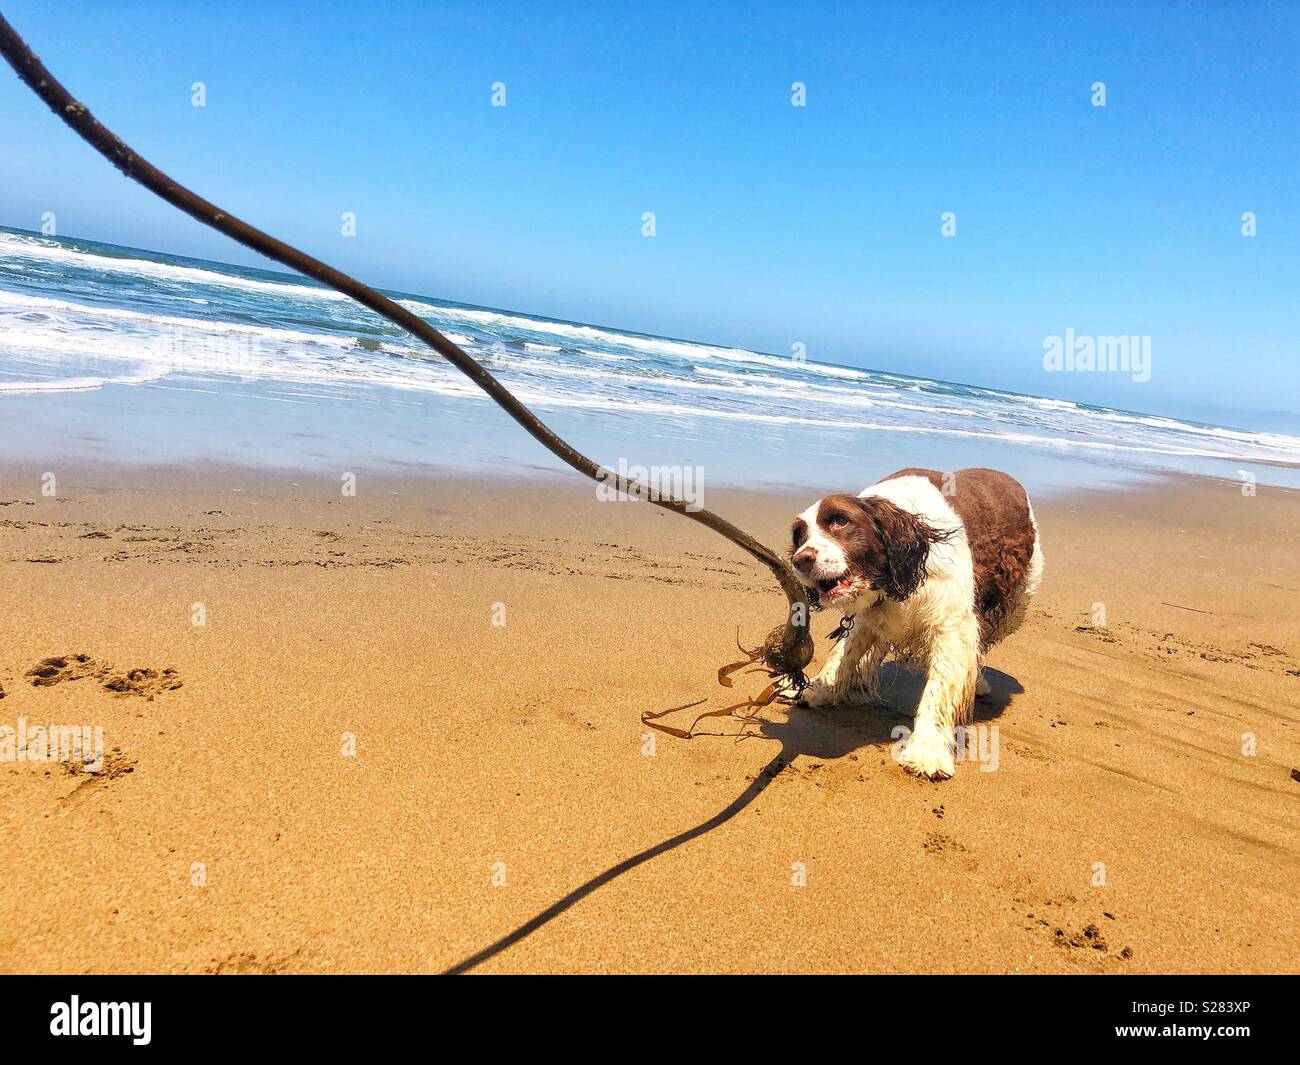 Floppy ears giddy happy English Springer Spaniel puppy dog enamored with playing tug of war with a long vine of Pacific bull kelp at a golden sand beach in California under sunny skies Stock Photo